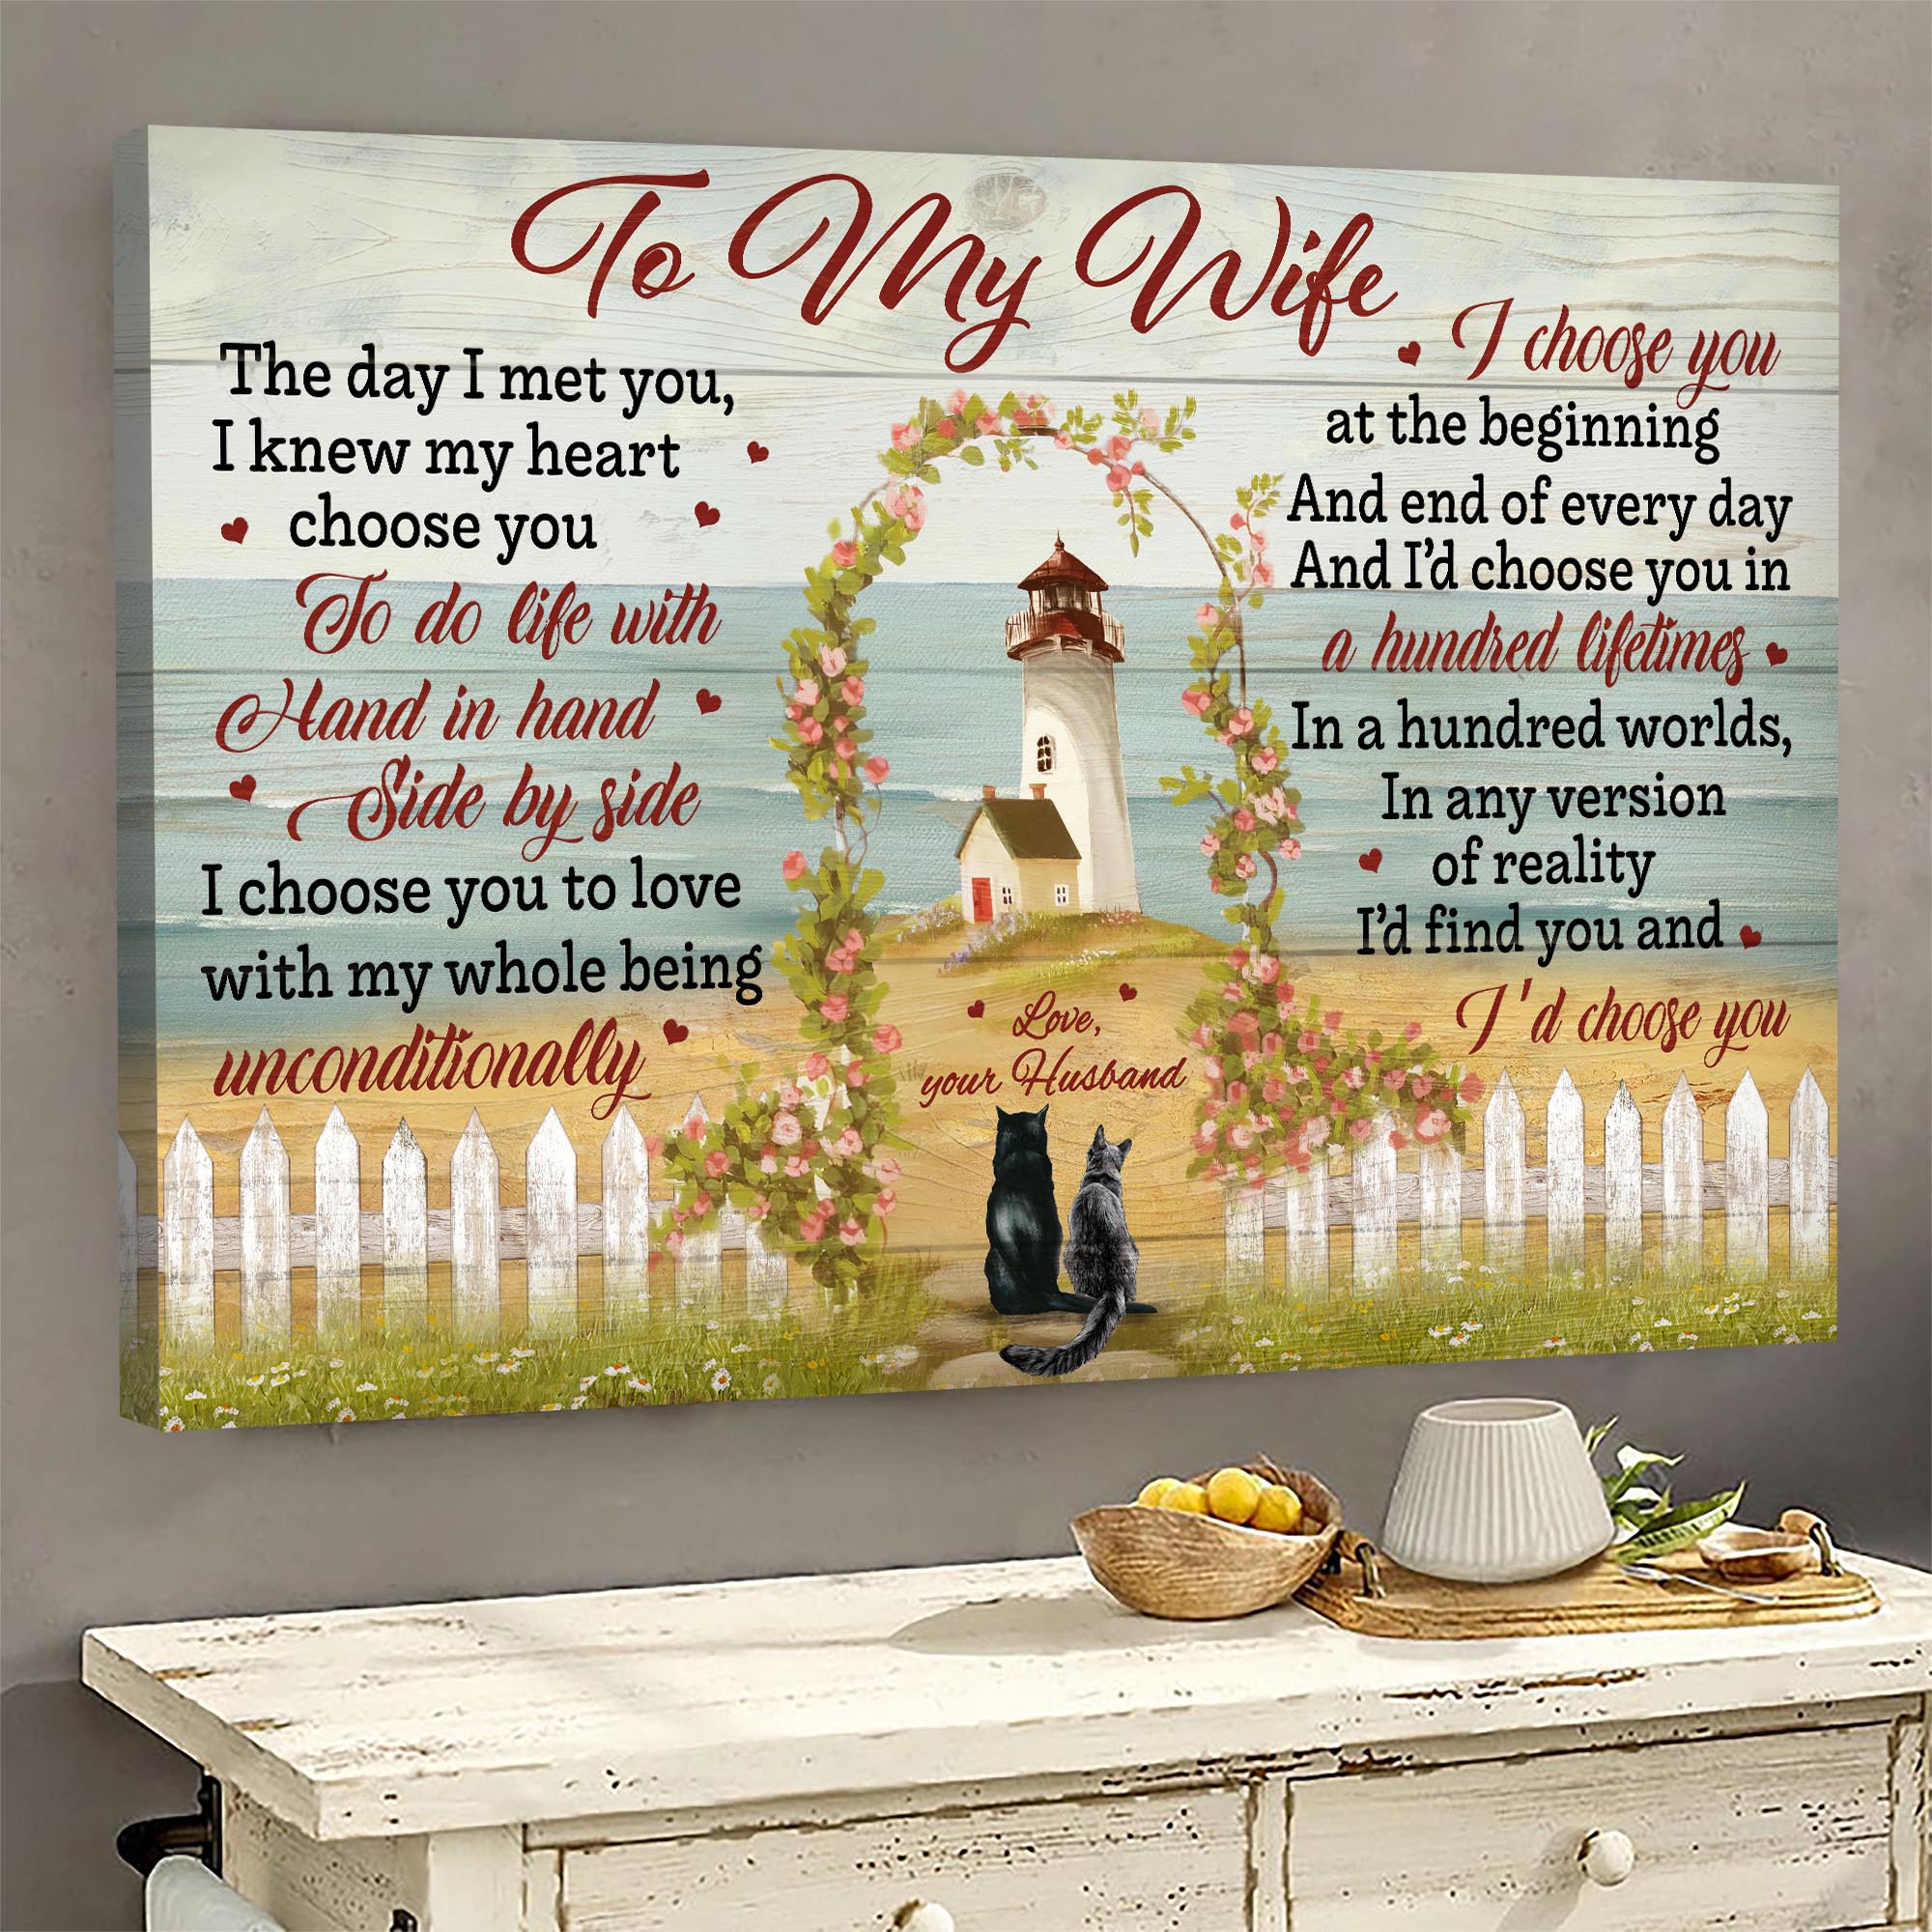 To my wife, By the beach, Flower gate, Black fog and cat, I'd choose you a hundred lifetimes - Couple Landscape Canvas Prints, Wall Art